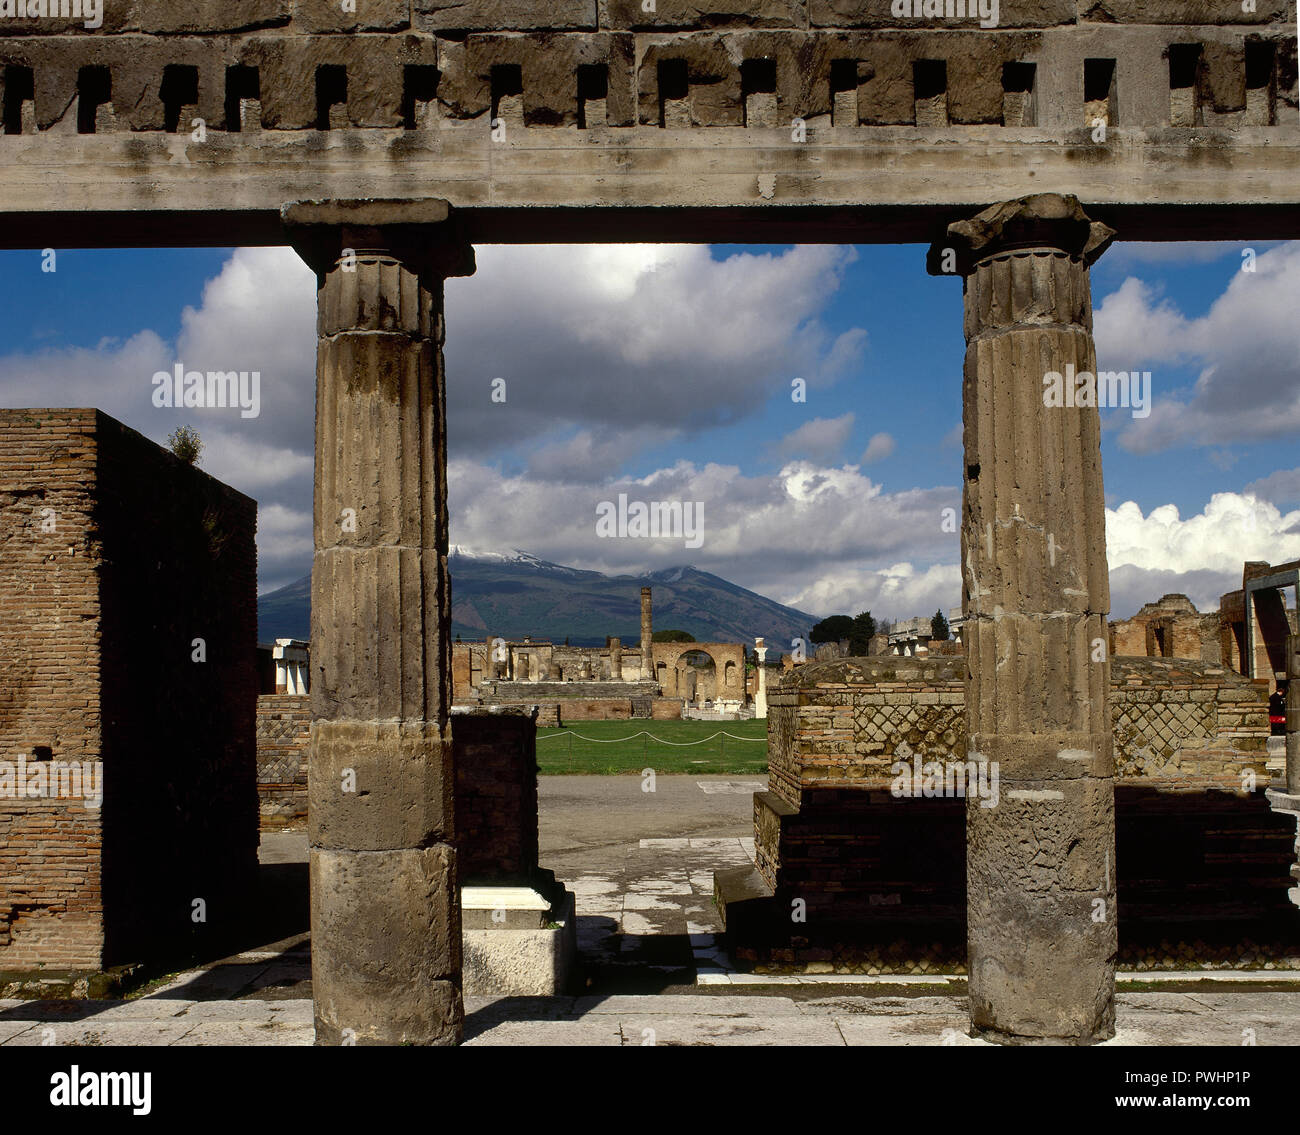 Italy. Pompeii. Roman city destroyed in 79 AD because of the eruption of the Vesuvius volcano. In the foregorund, Portico of the Samnite period. At the background, remains of the Doric columns of the Temple of Jupiter (Fortuna Augusta) at the Forum. La Campania. Stock Photo